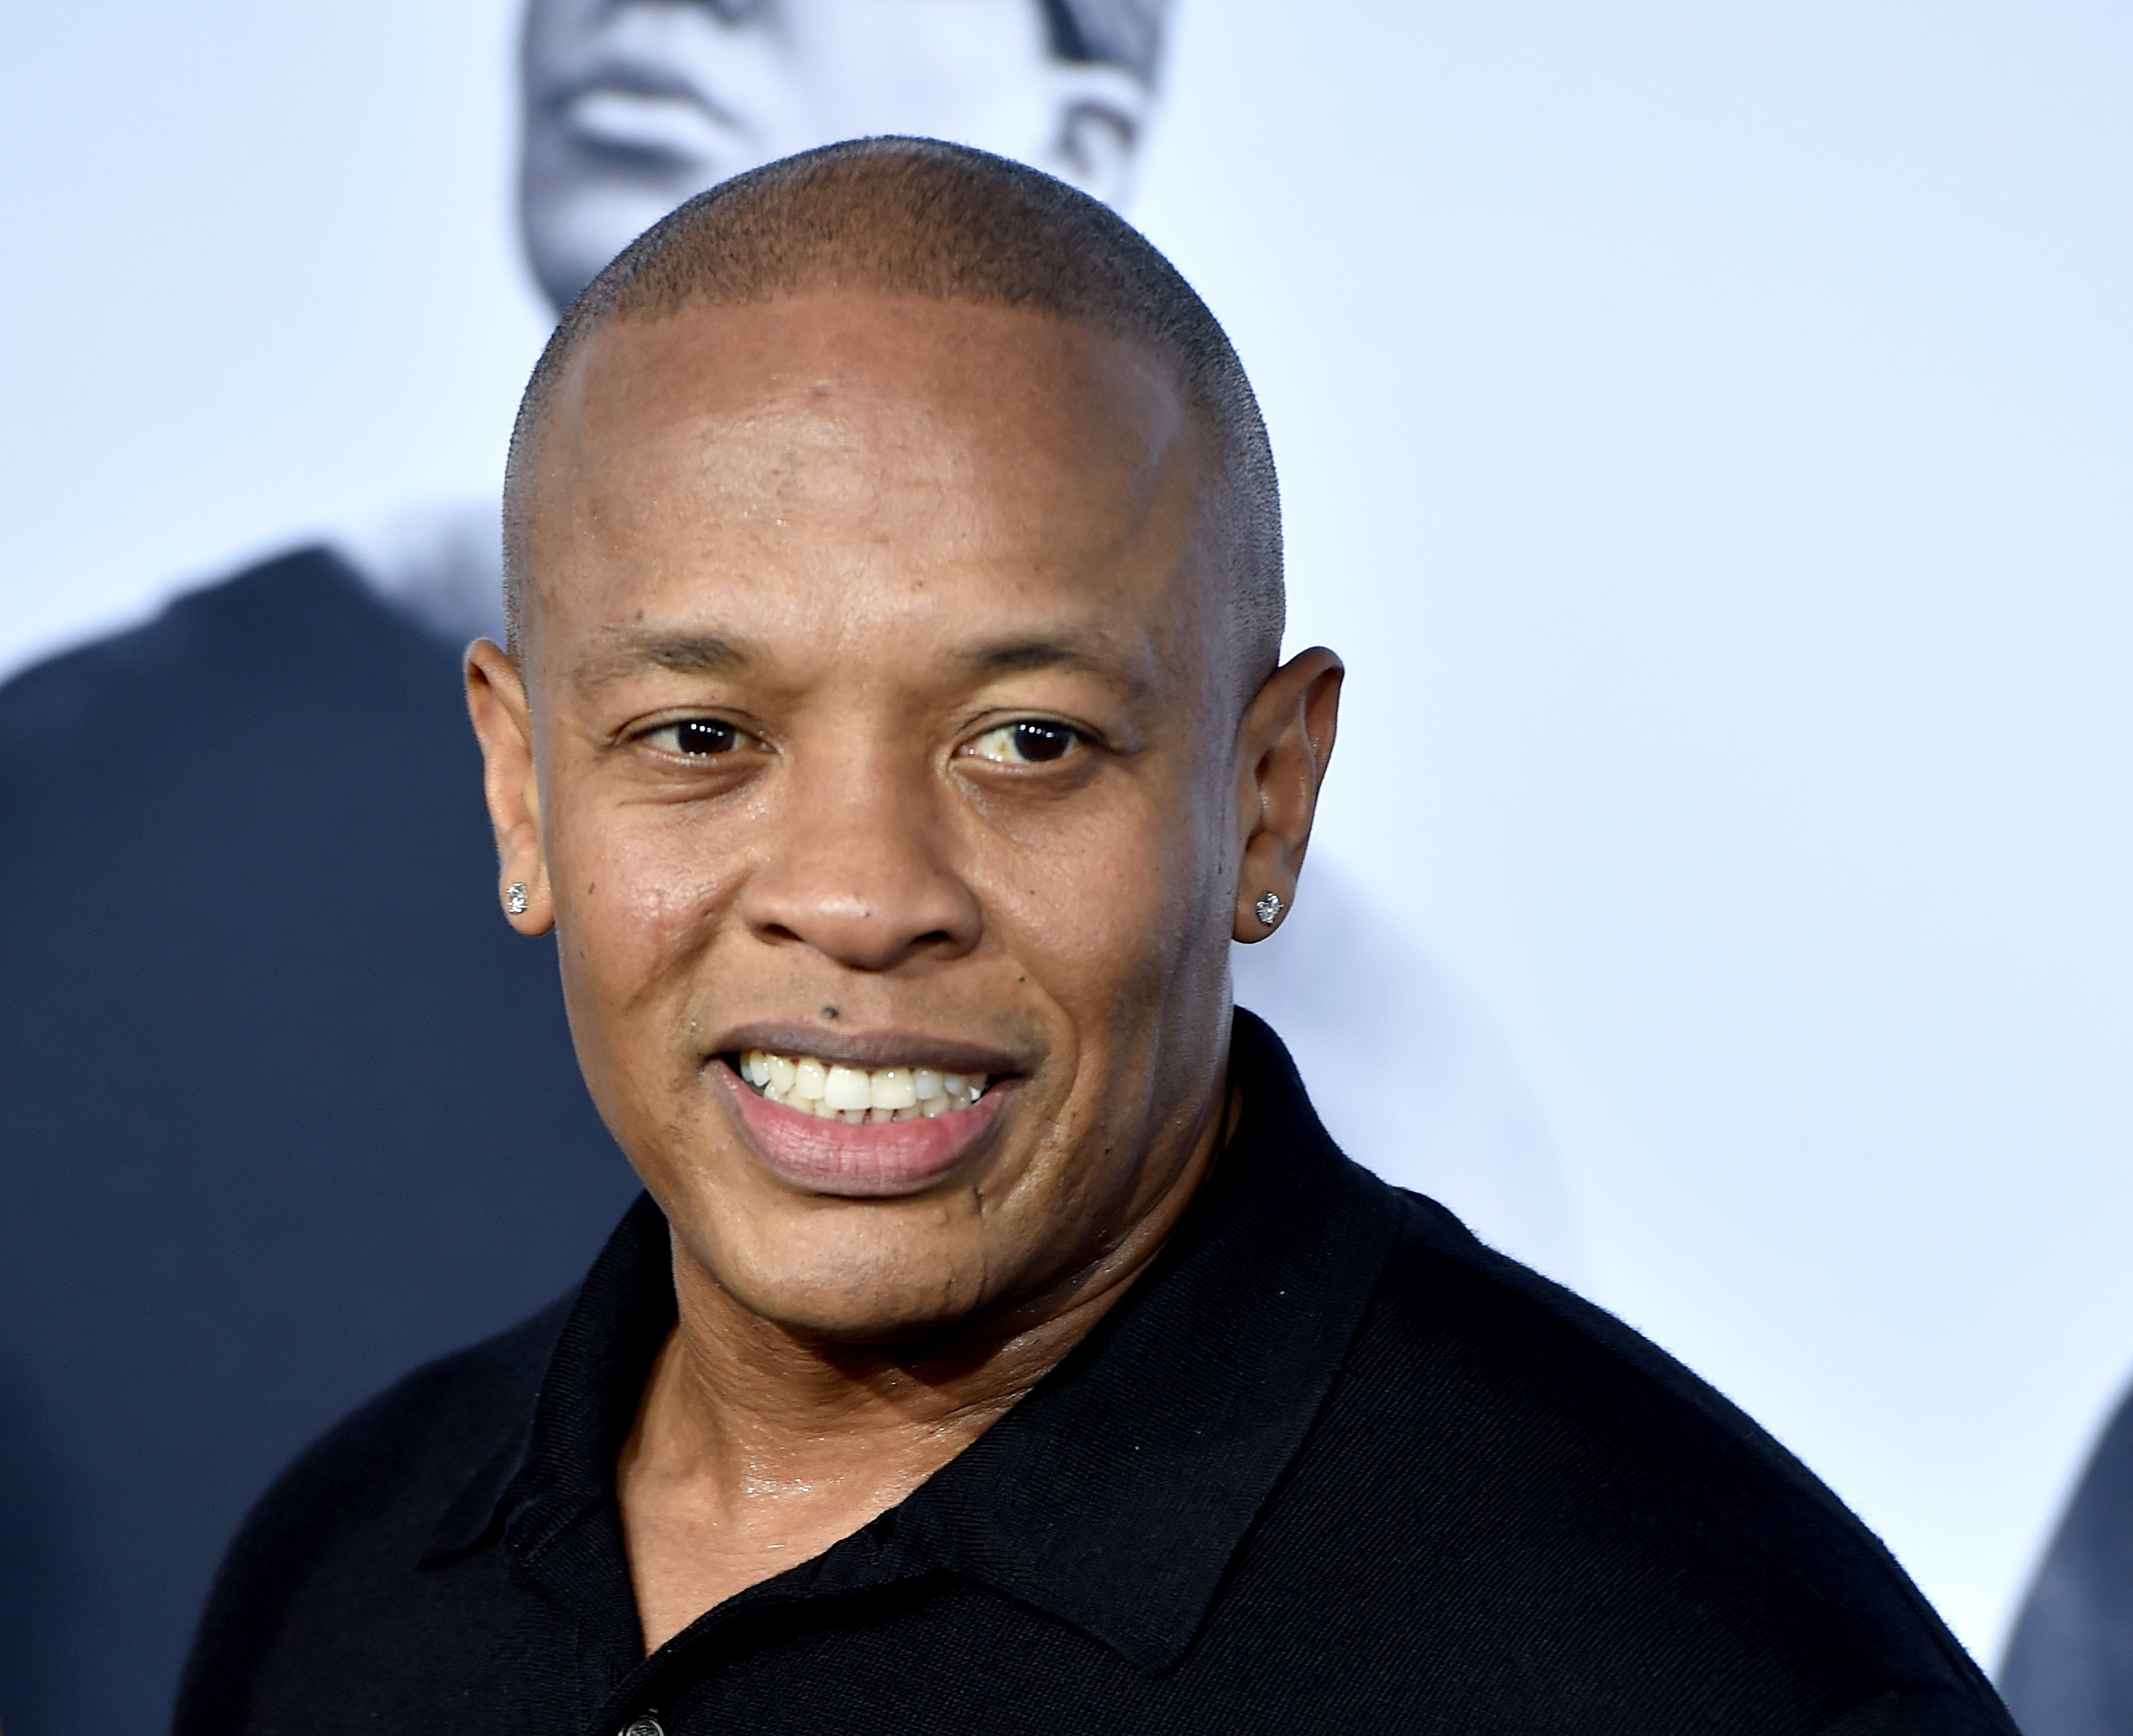 Rapper Dr. Dre arrives at the premiere of Universal Pictures and Legendary Pictures' "Straight Outta Compton" at the Microsoft Theatre in Los Angeles on Aug. 10, 2015 (Kevin Winter—Getty Images)